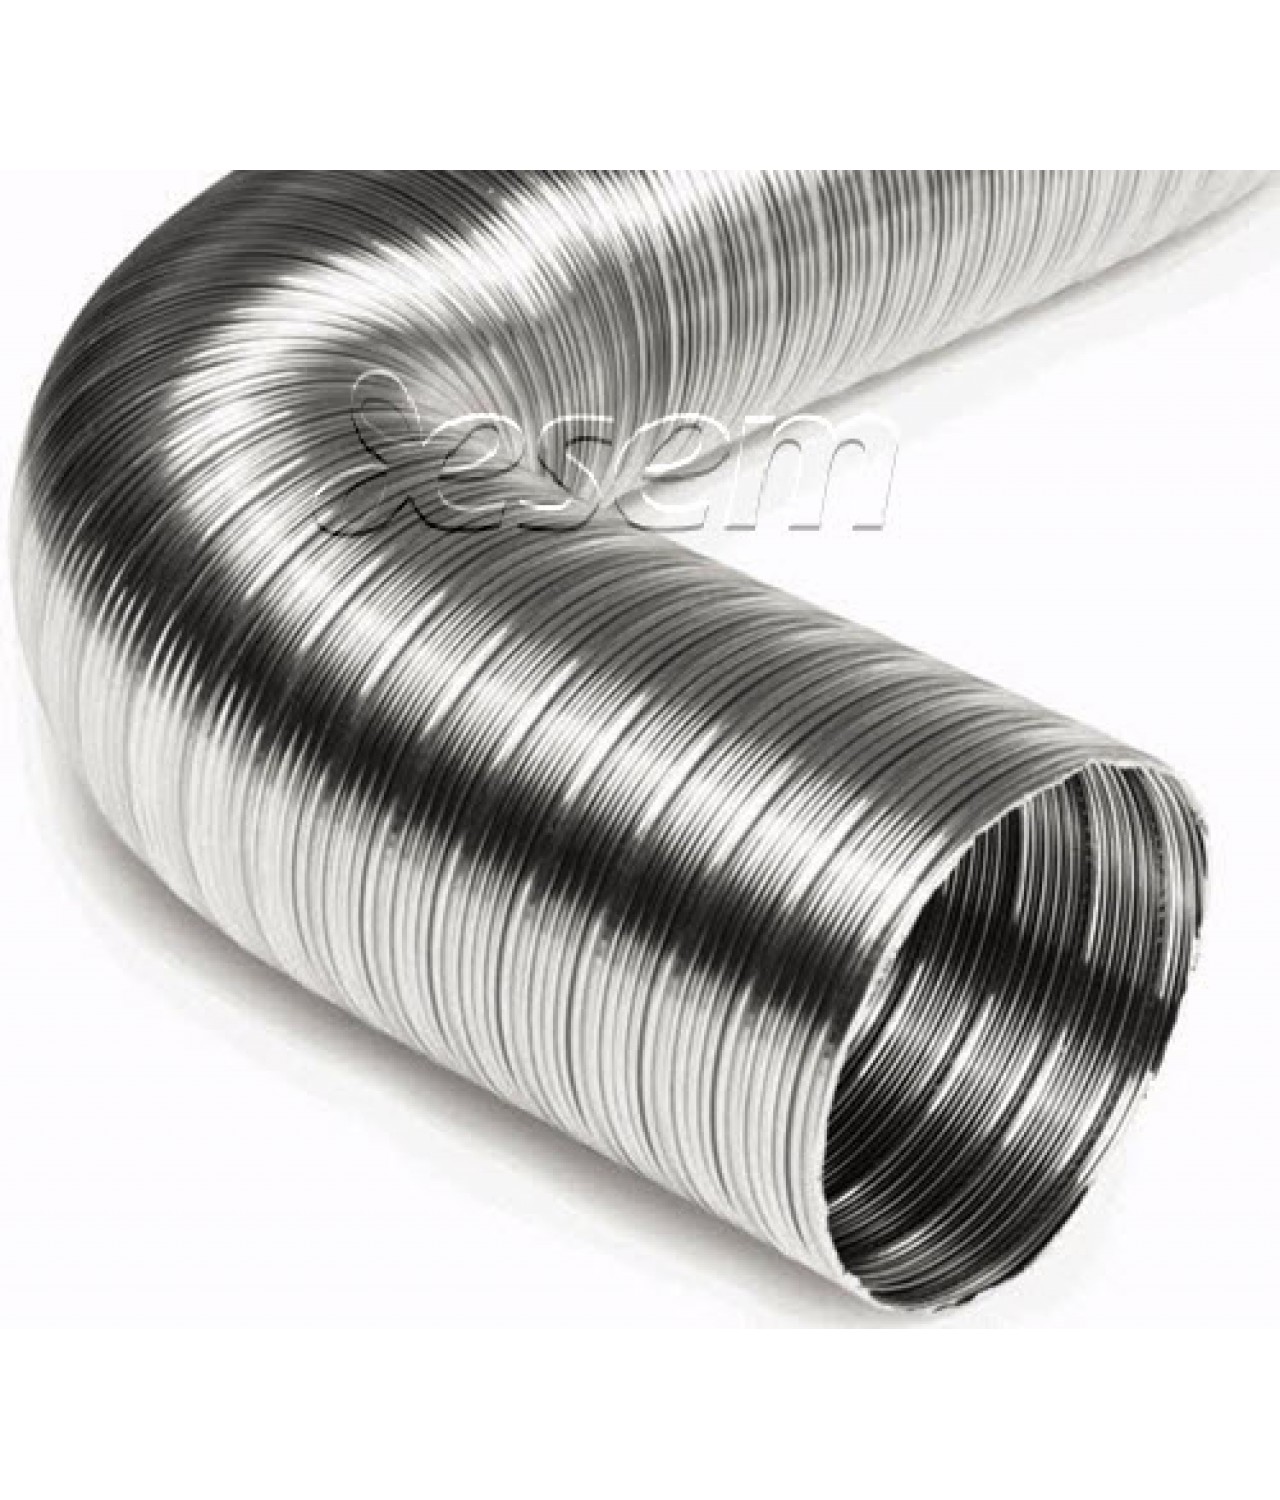 Stainless steel flexible duct NF-FLEX